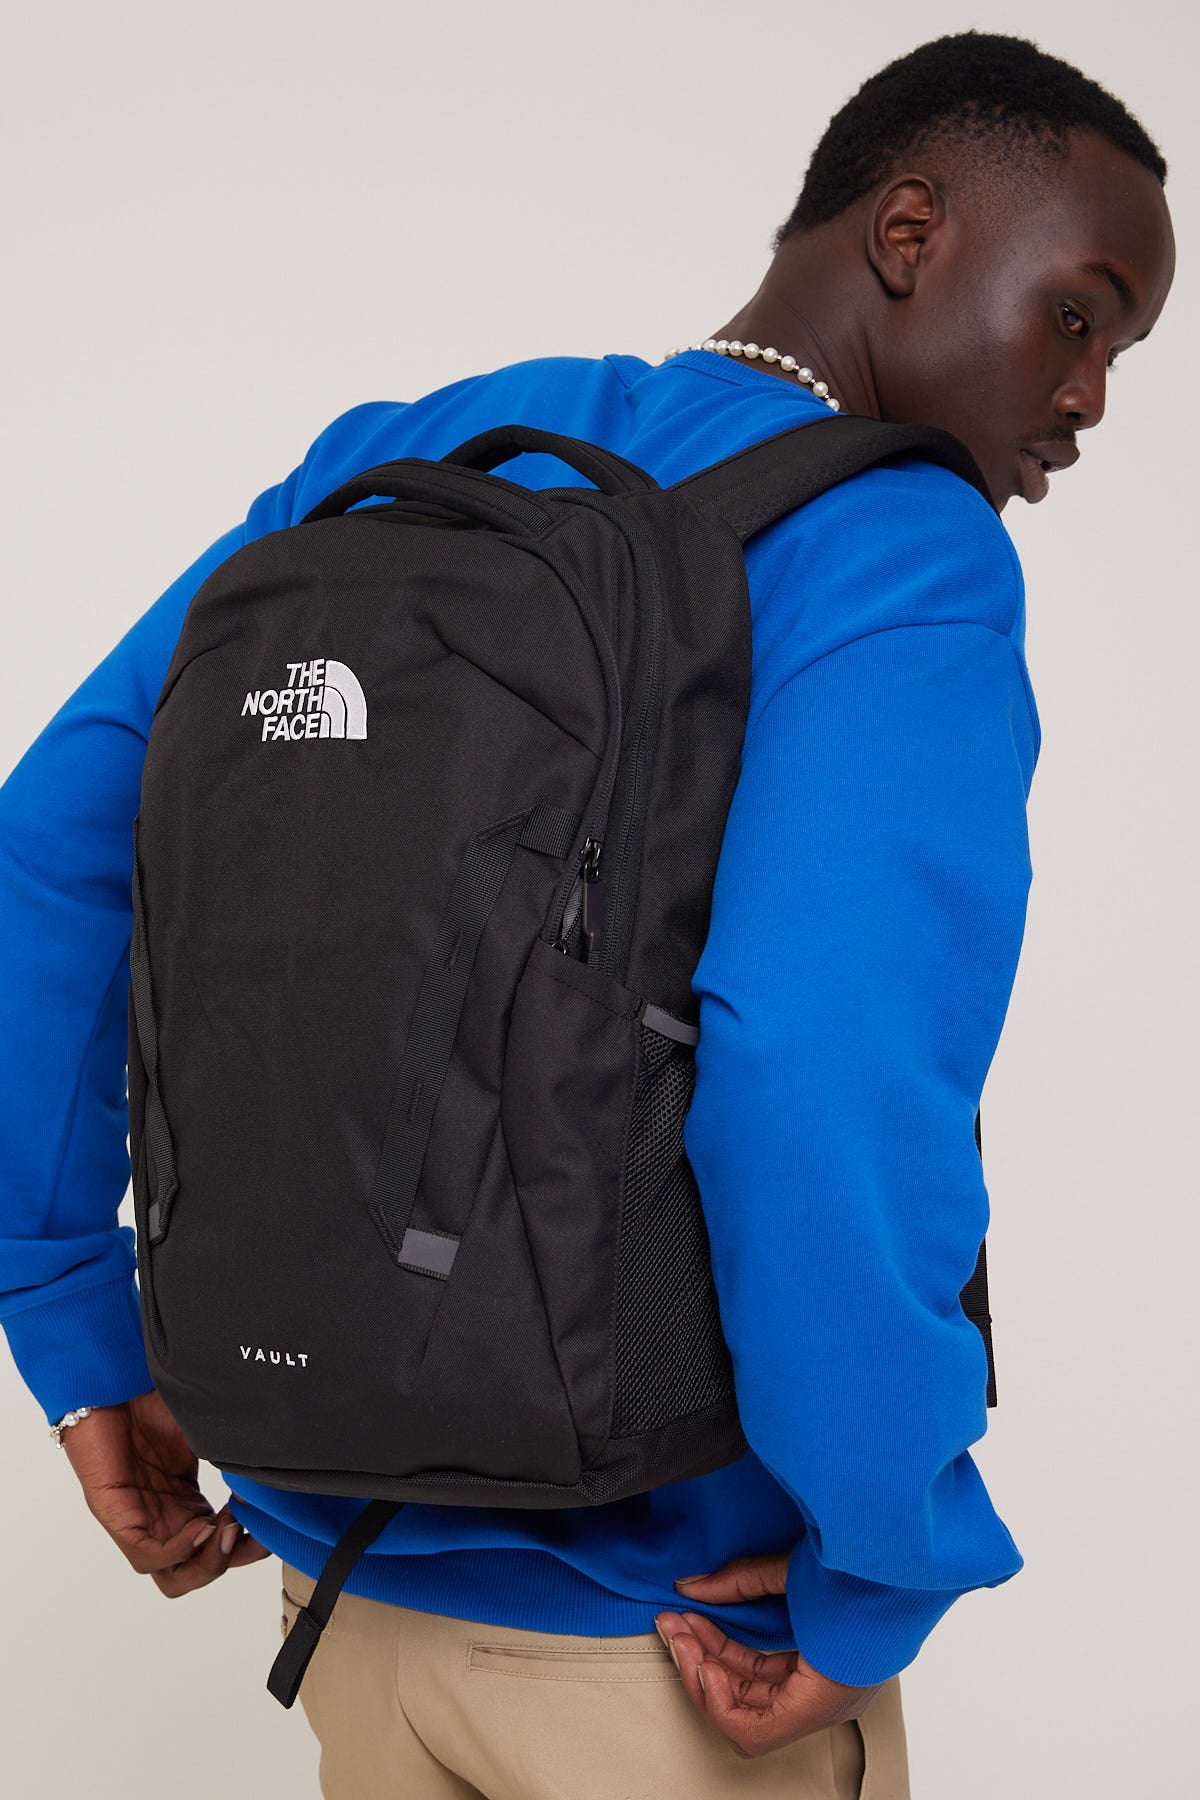 The North Face Vault Backpack Black